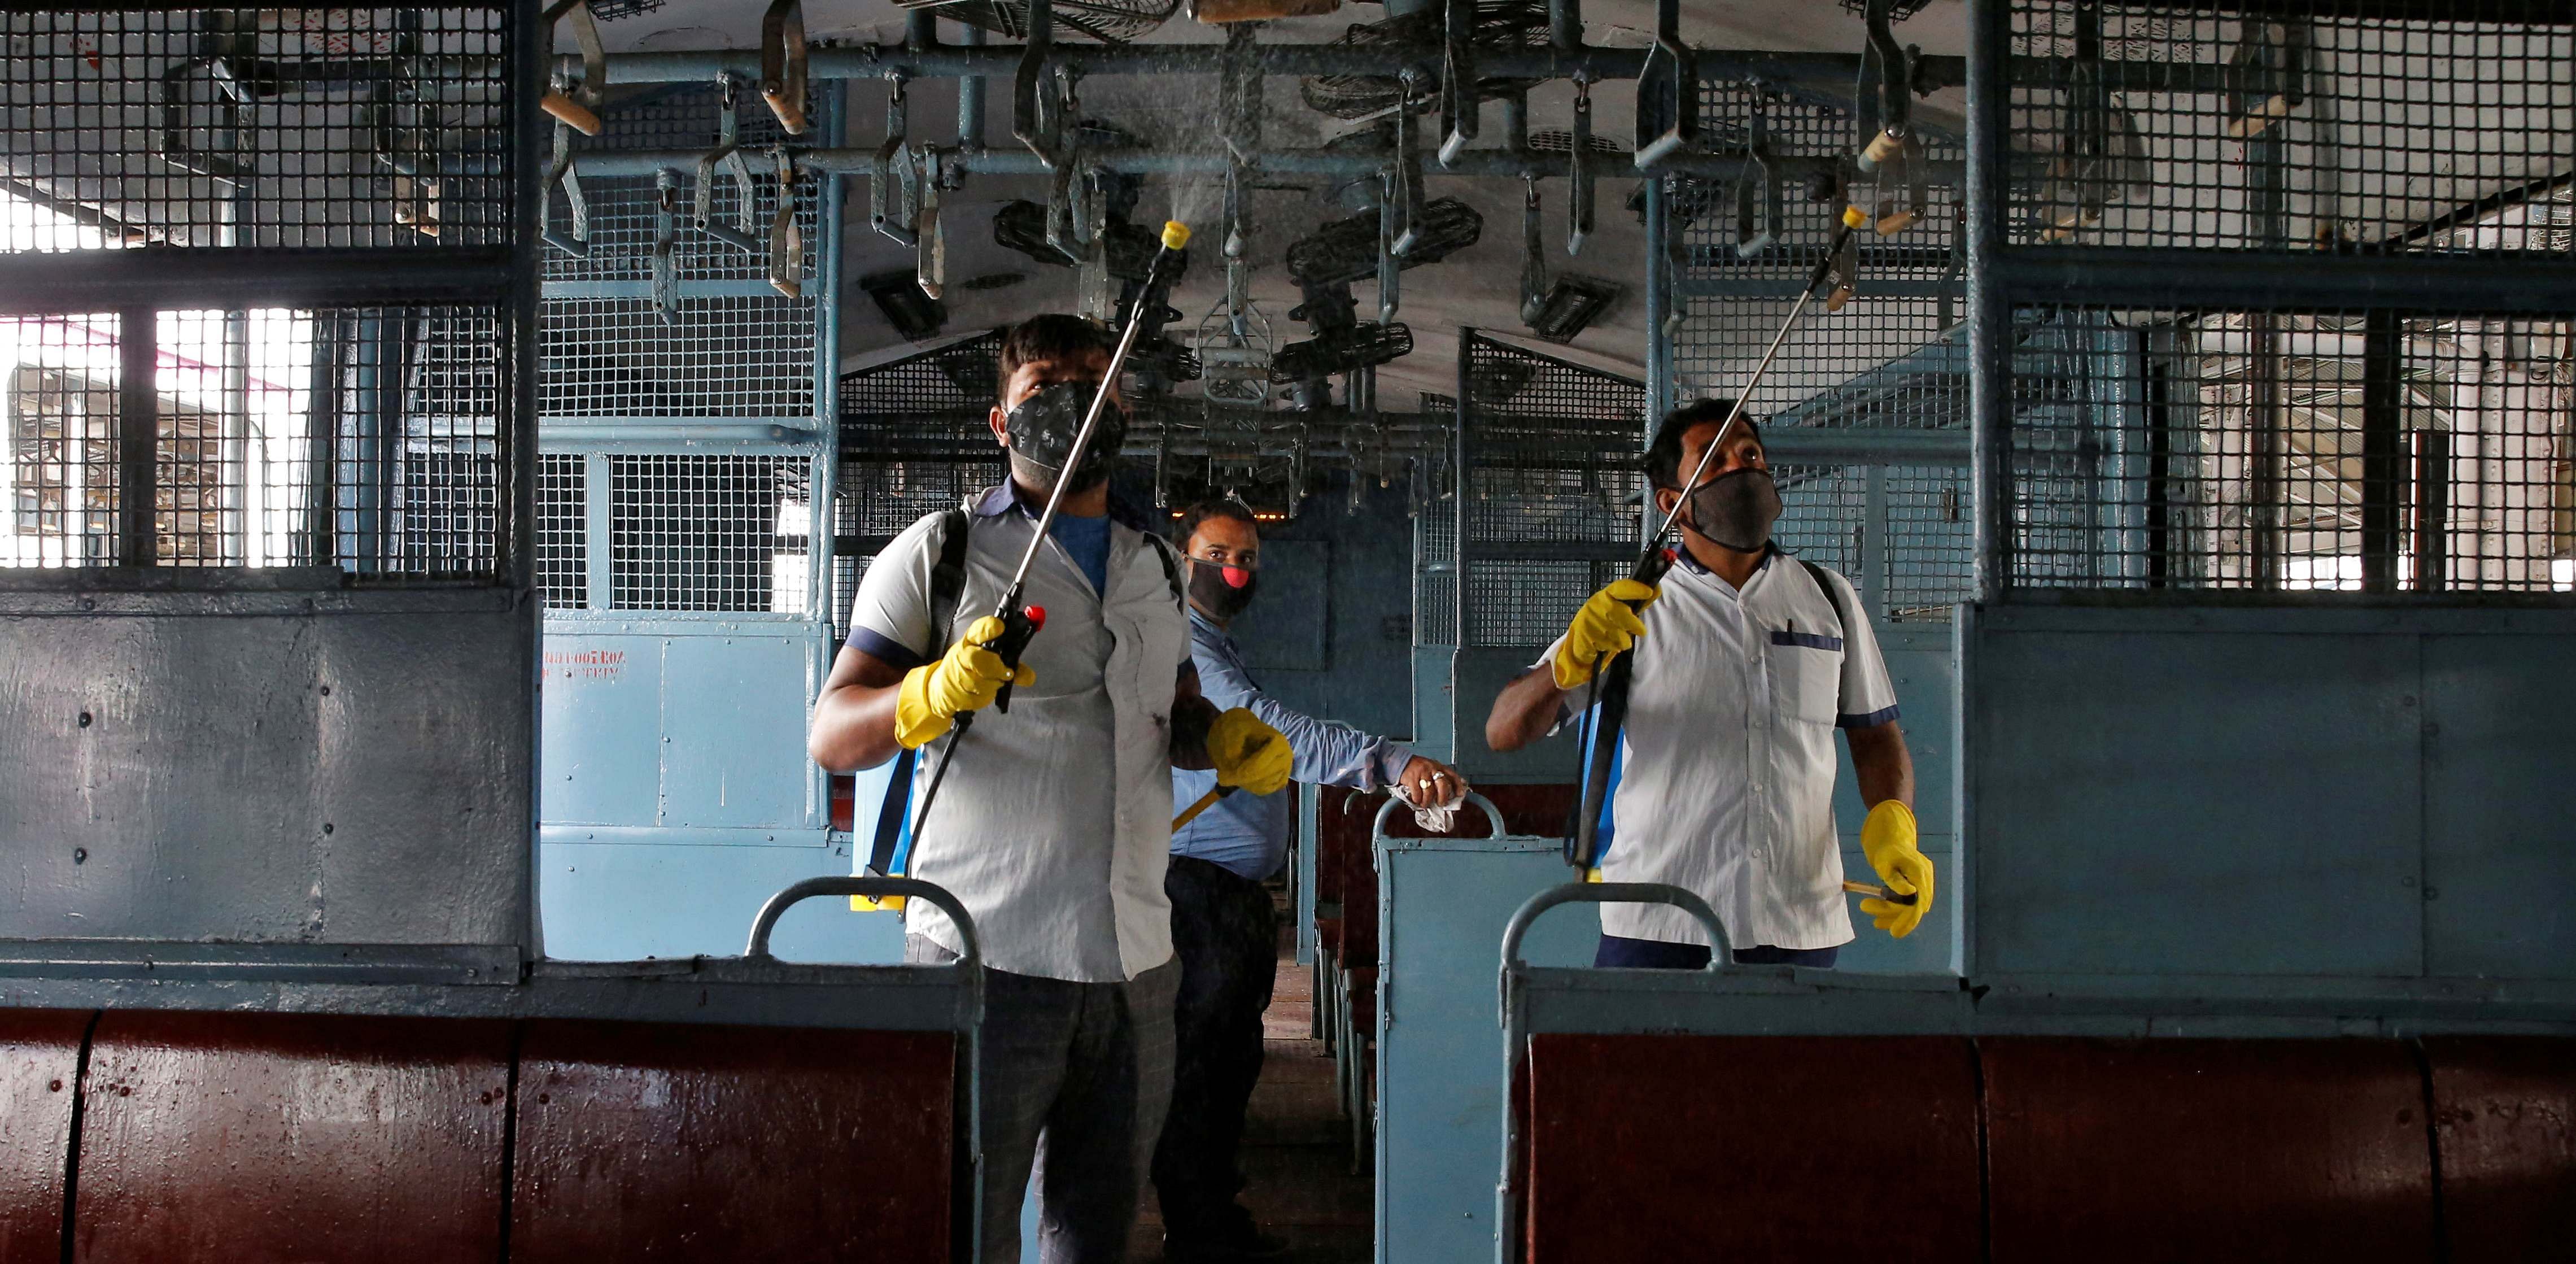 Workers spray disinfectant to sanitize a suburban train coach before authorities resume the train services, amidst the coronavirus disease (COVID-19) outbreak, at Howrah station on the outskirts of Kolkata. Credit: Reuters